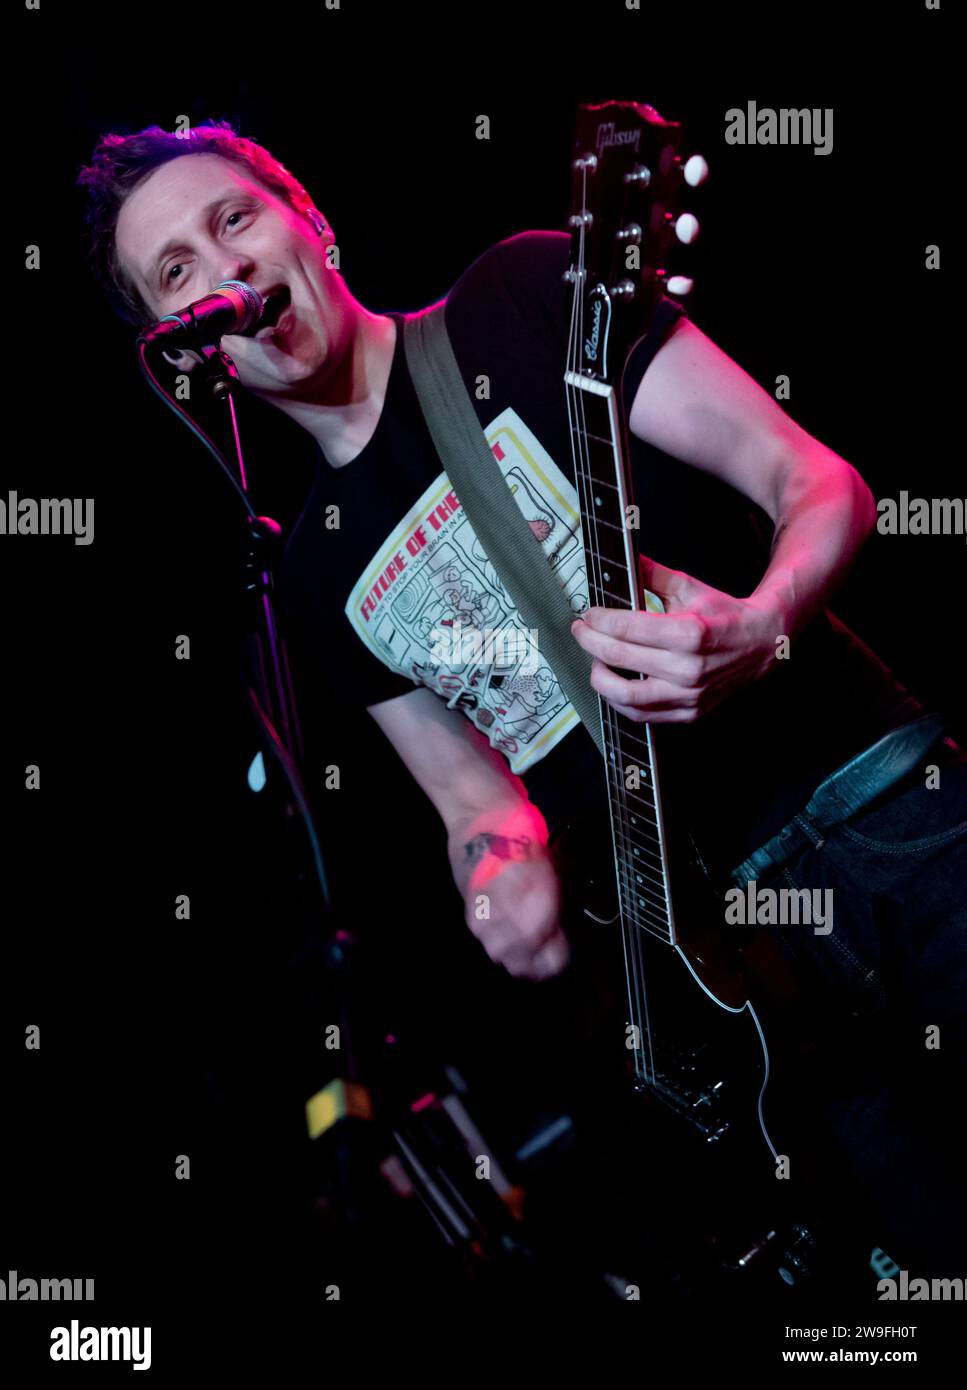 Blly Lunn (Vocalist/Guitarist) of The Subways, live on stage - Birmingham, 2015 Stock Photo